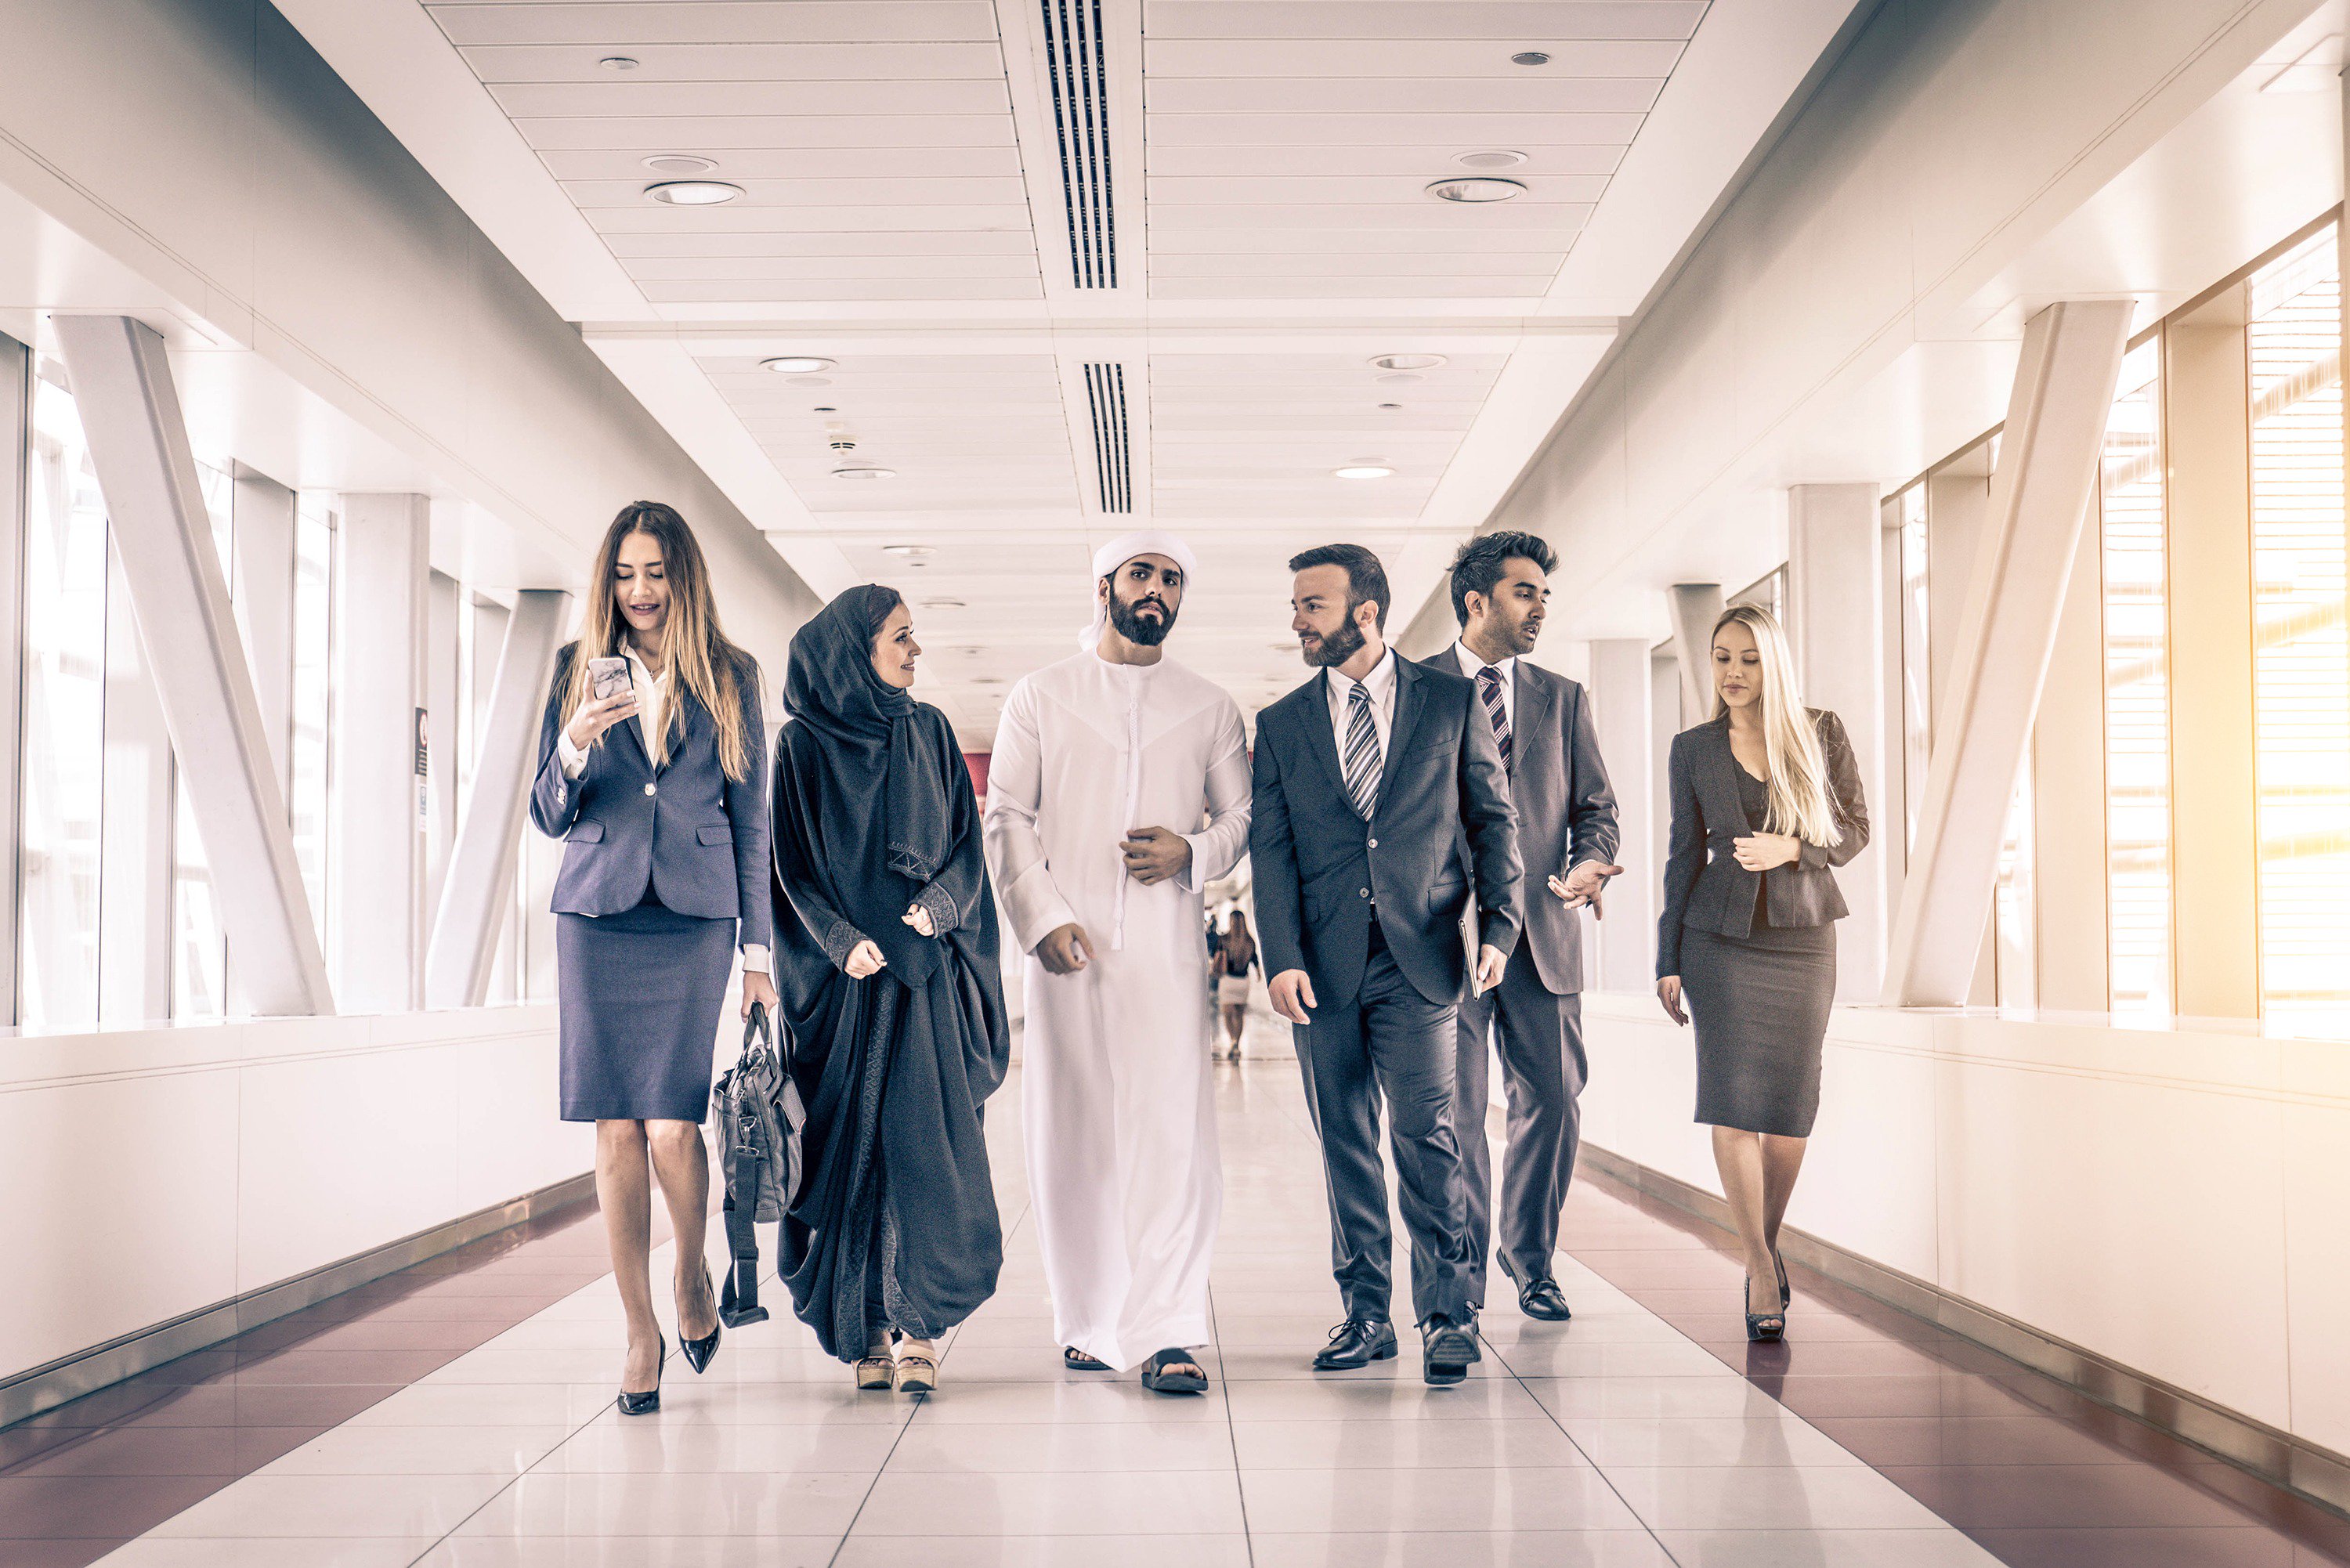 How to Get a Company License in Dubai